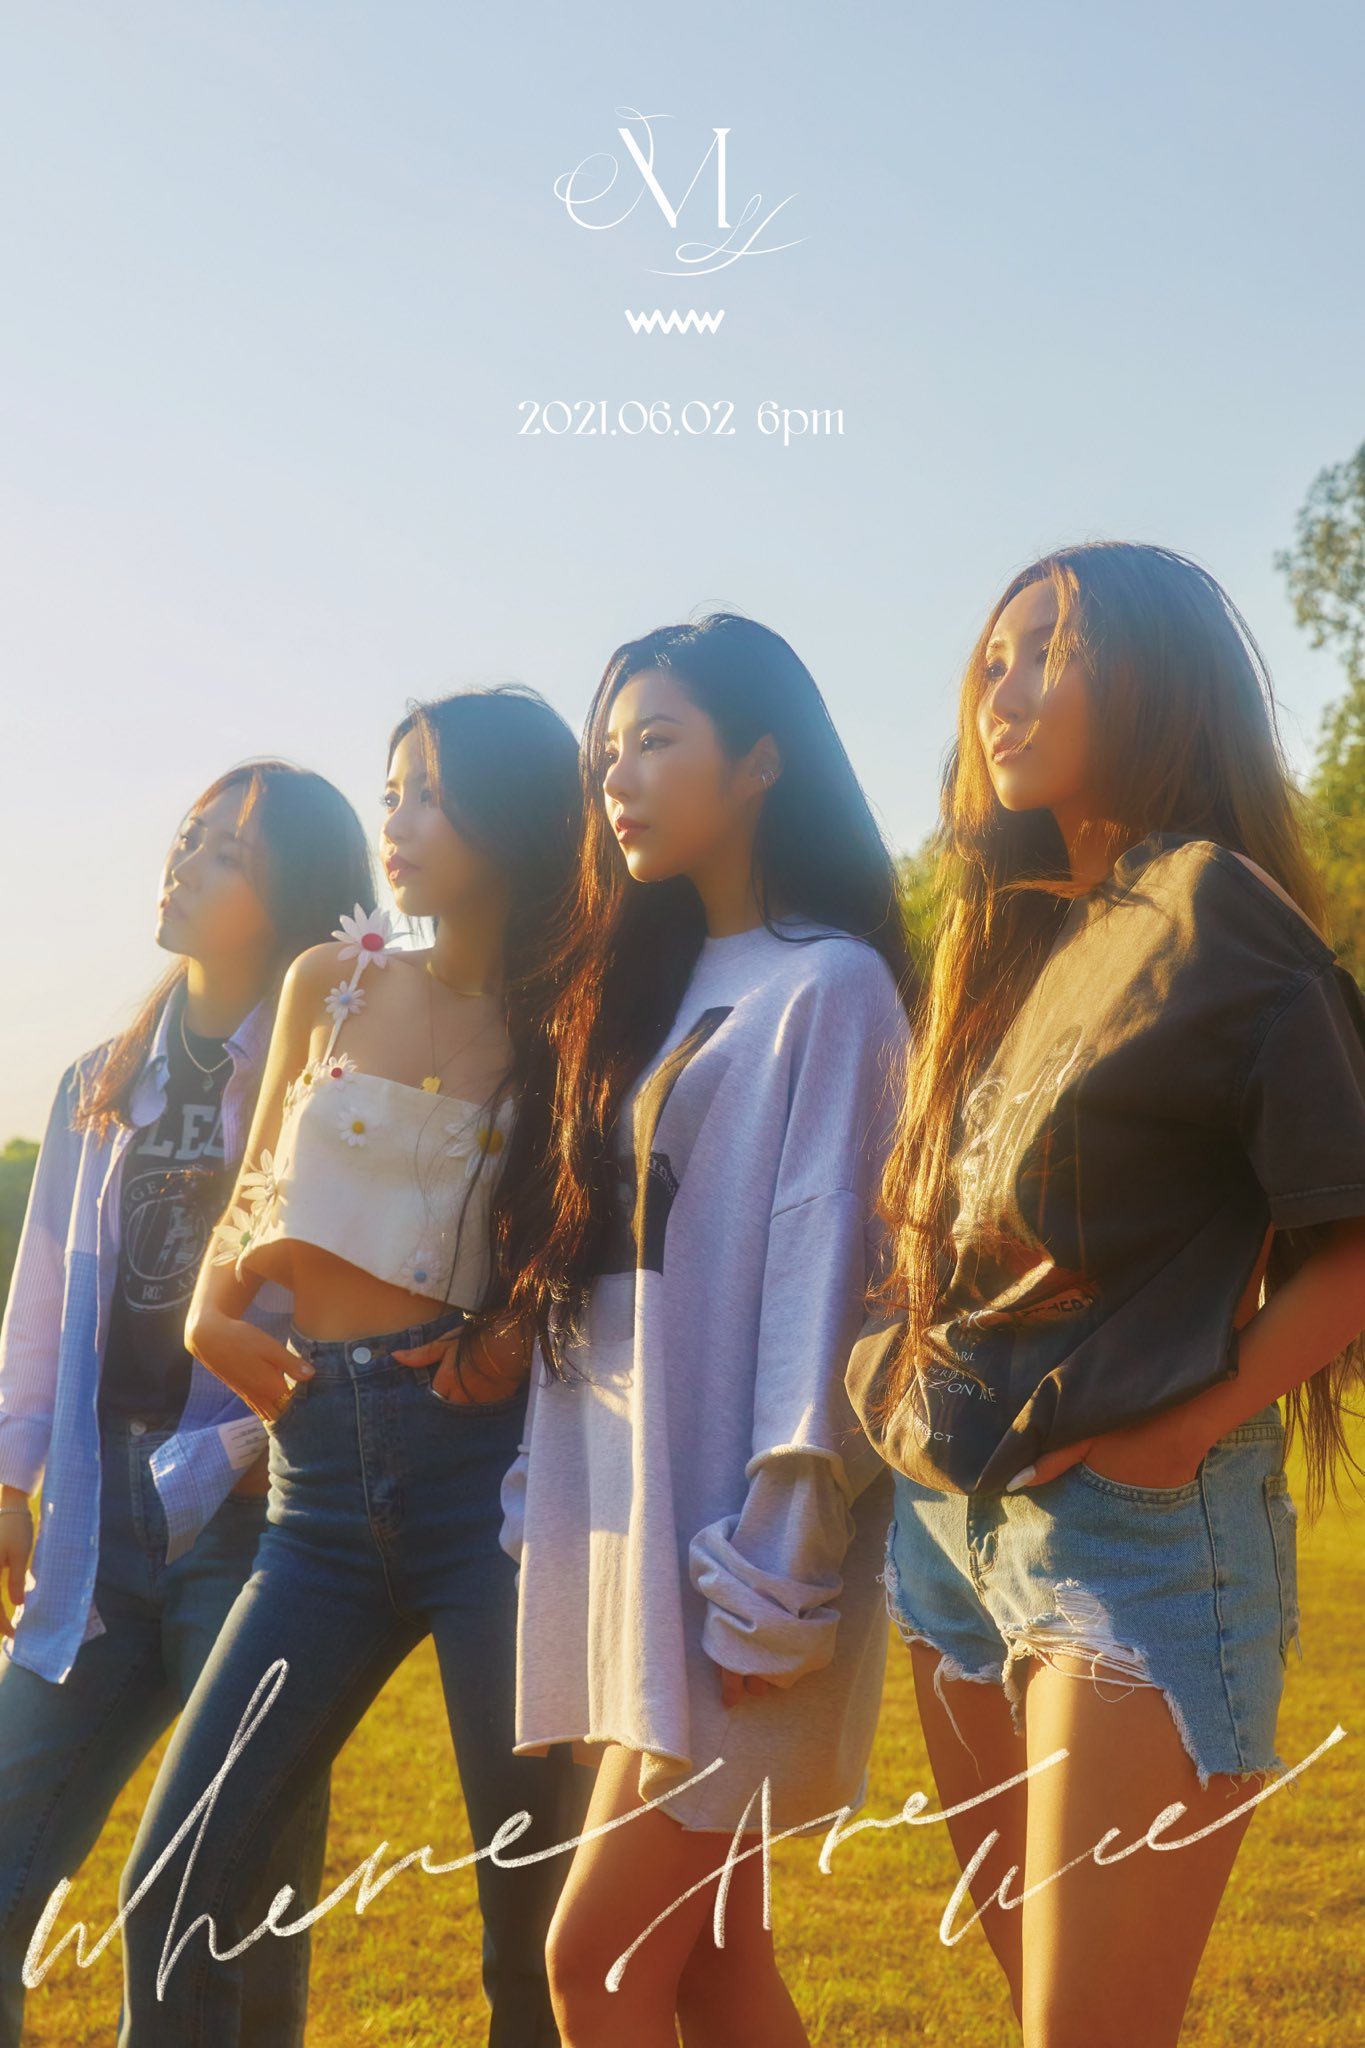 WATCH: MAMAMOO returns with ‘Where Are We Now’ music video